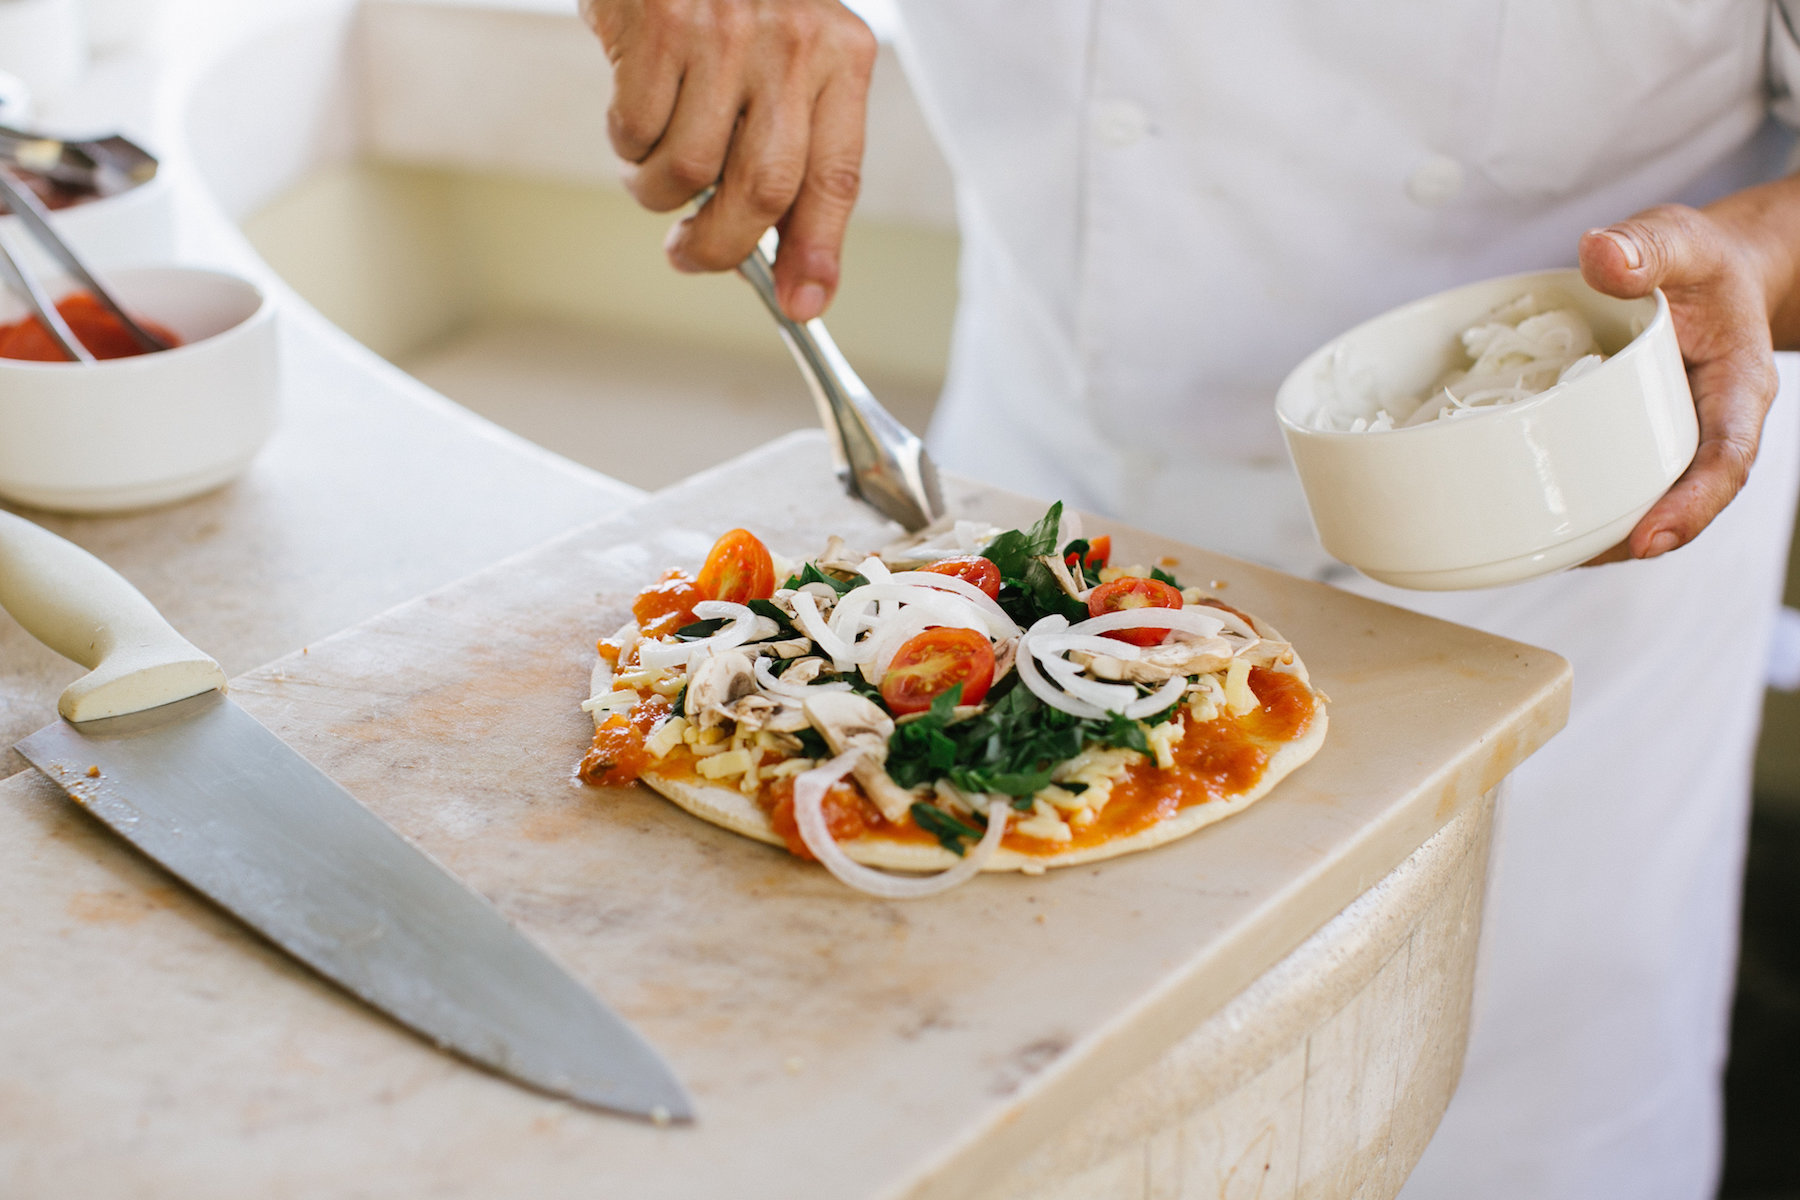 More information about "Villa Carola Perks: Host a PIzza Party for Your Guests"